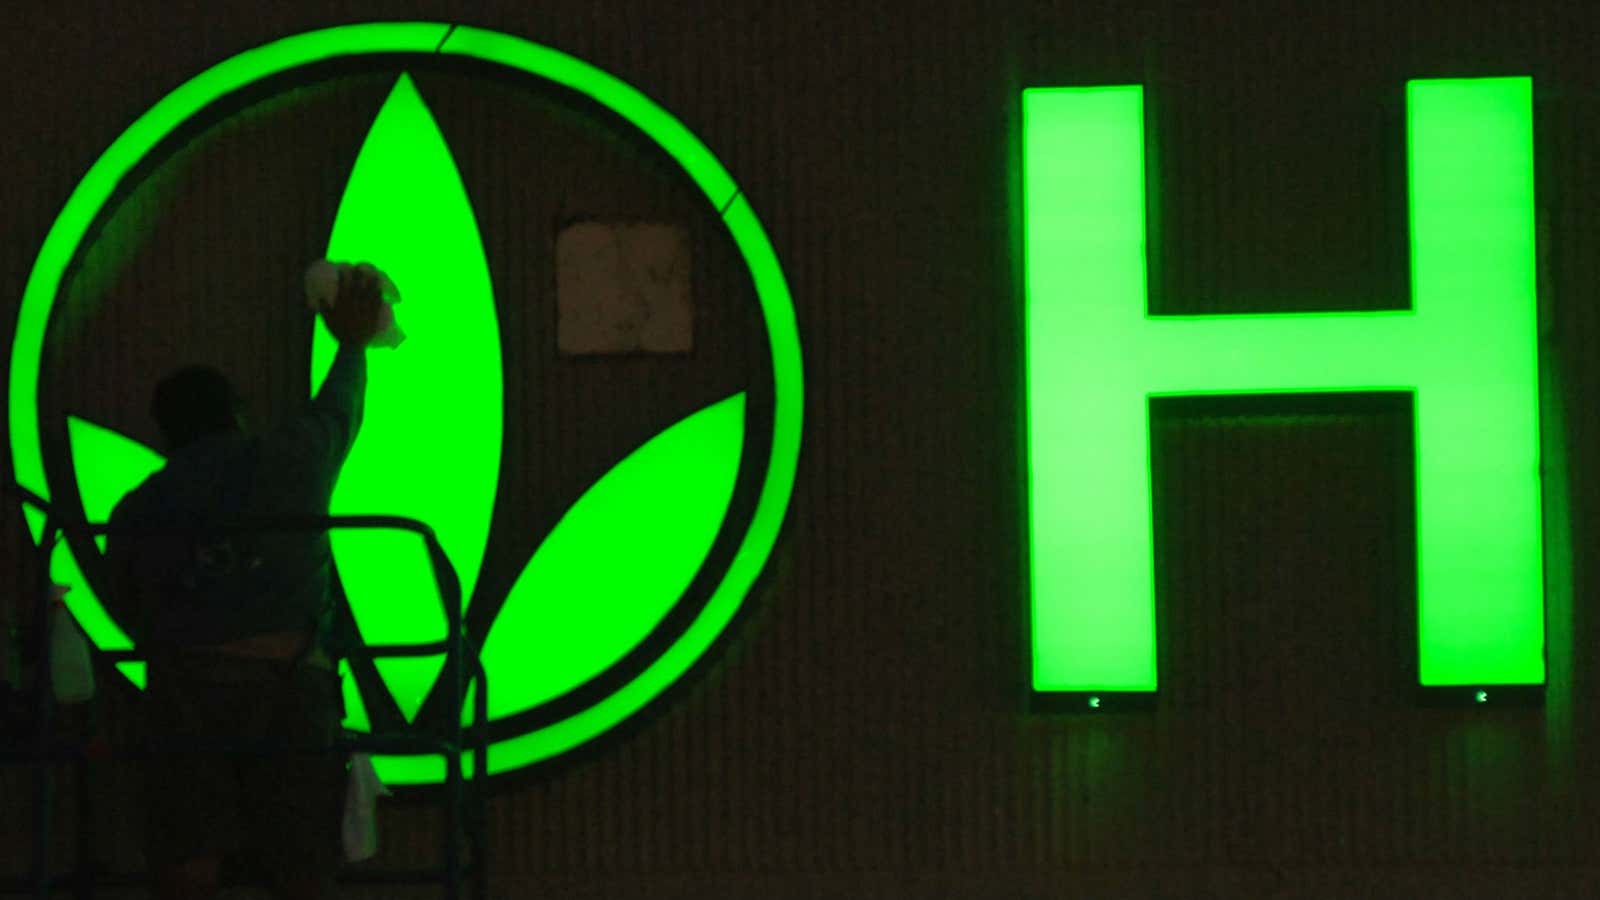 The Herbalife brand is increasingly recognizable around the world.